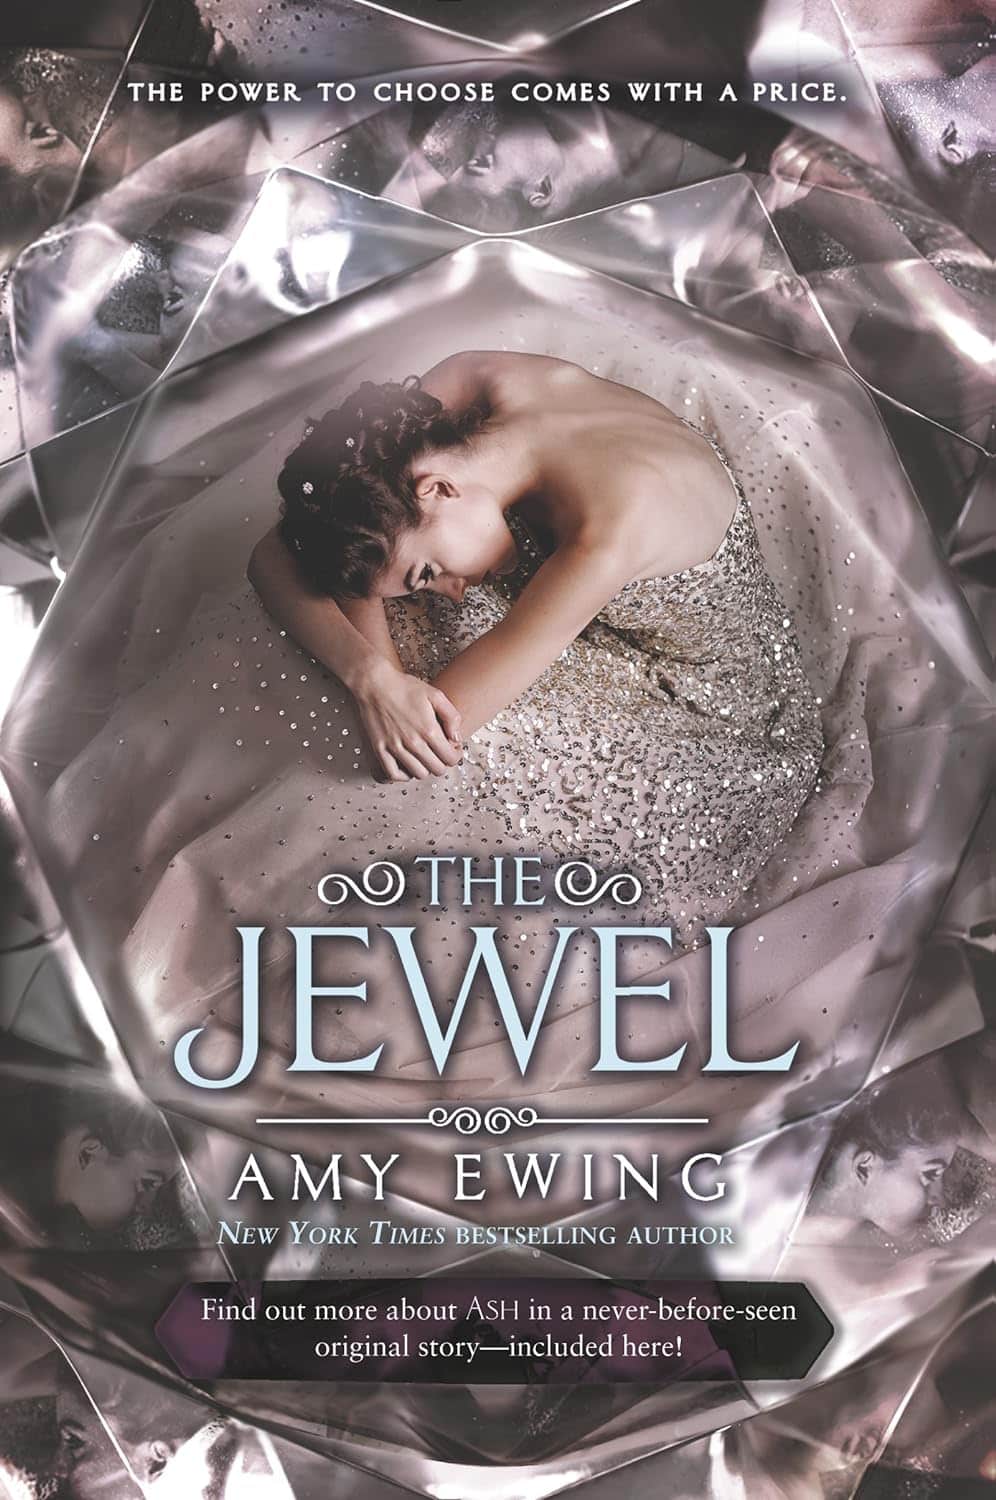 The Jewel by Amy Ewing